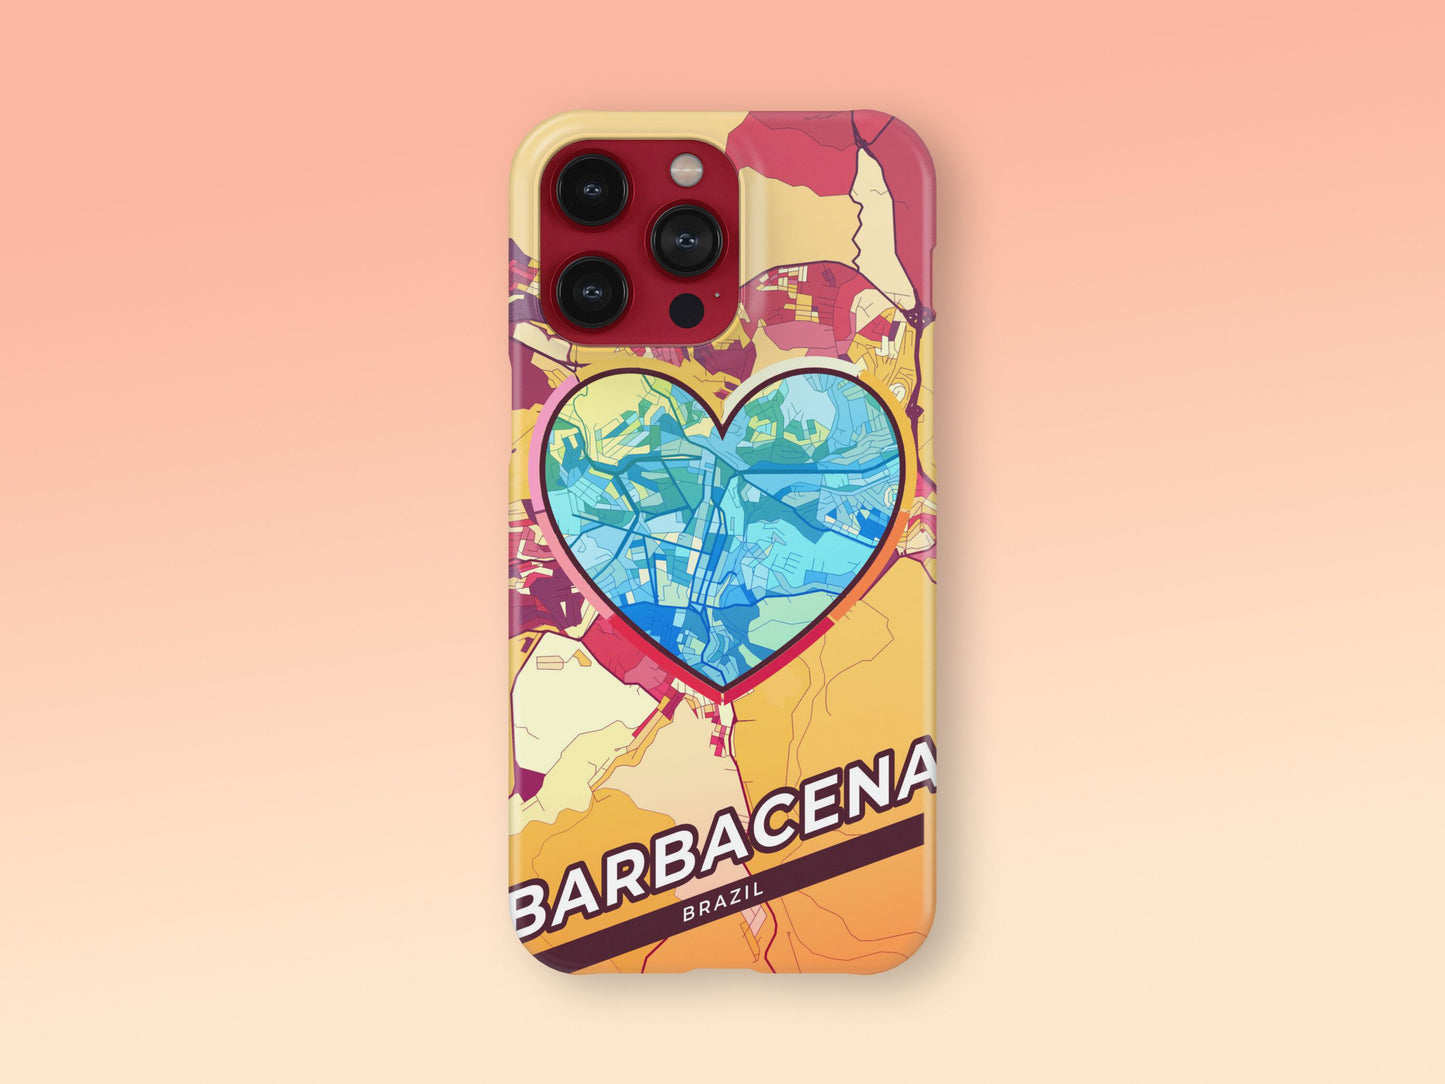 Barbacena Brazil slim phone case with colorful icon. Birthday, wedding or housewarming gift. Couple match cases. 2